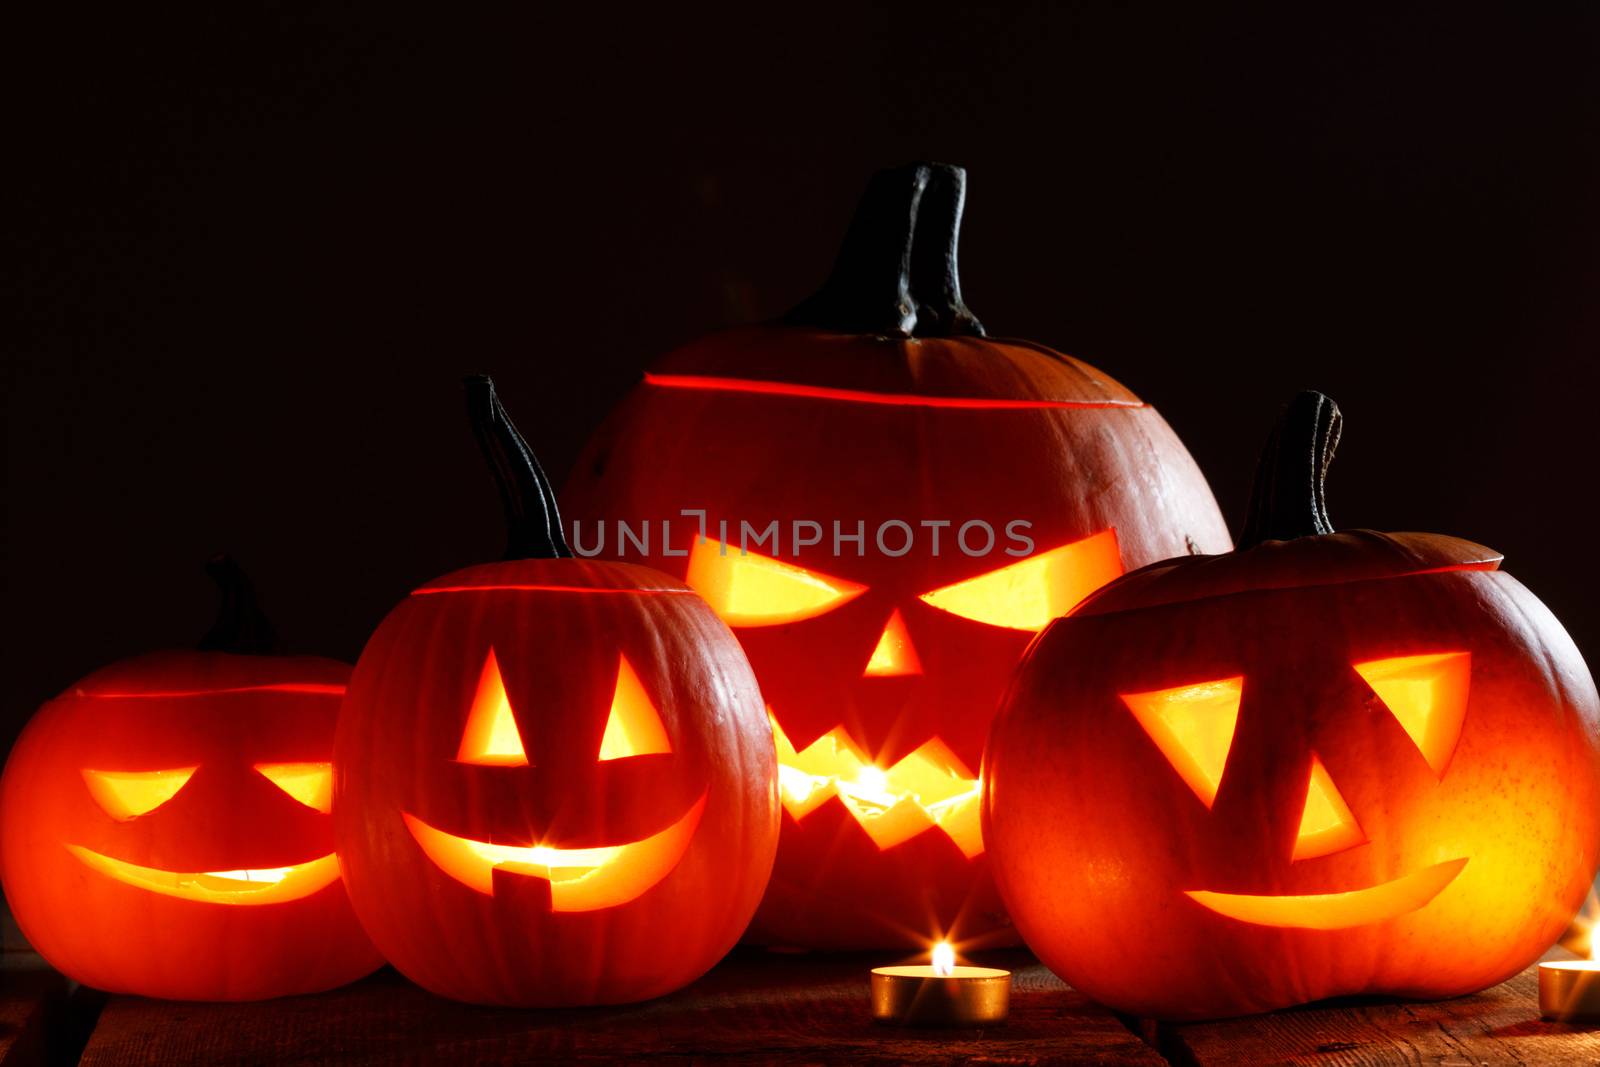 Halloween pumpkin head lanterns and burning candles on wooden background isolated on black